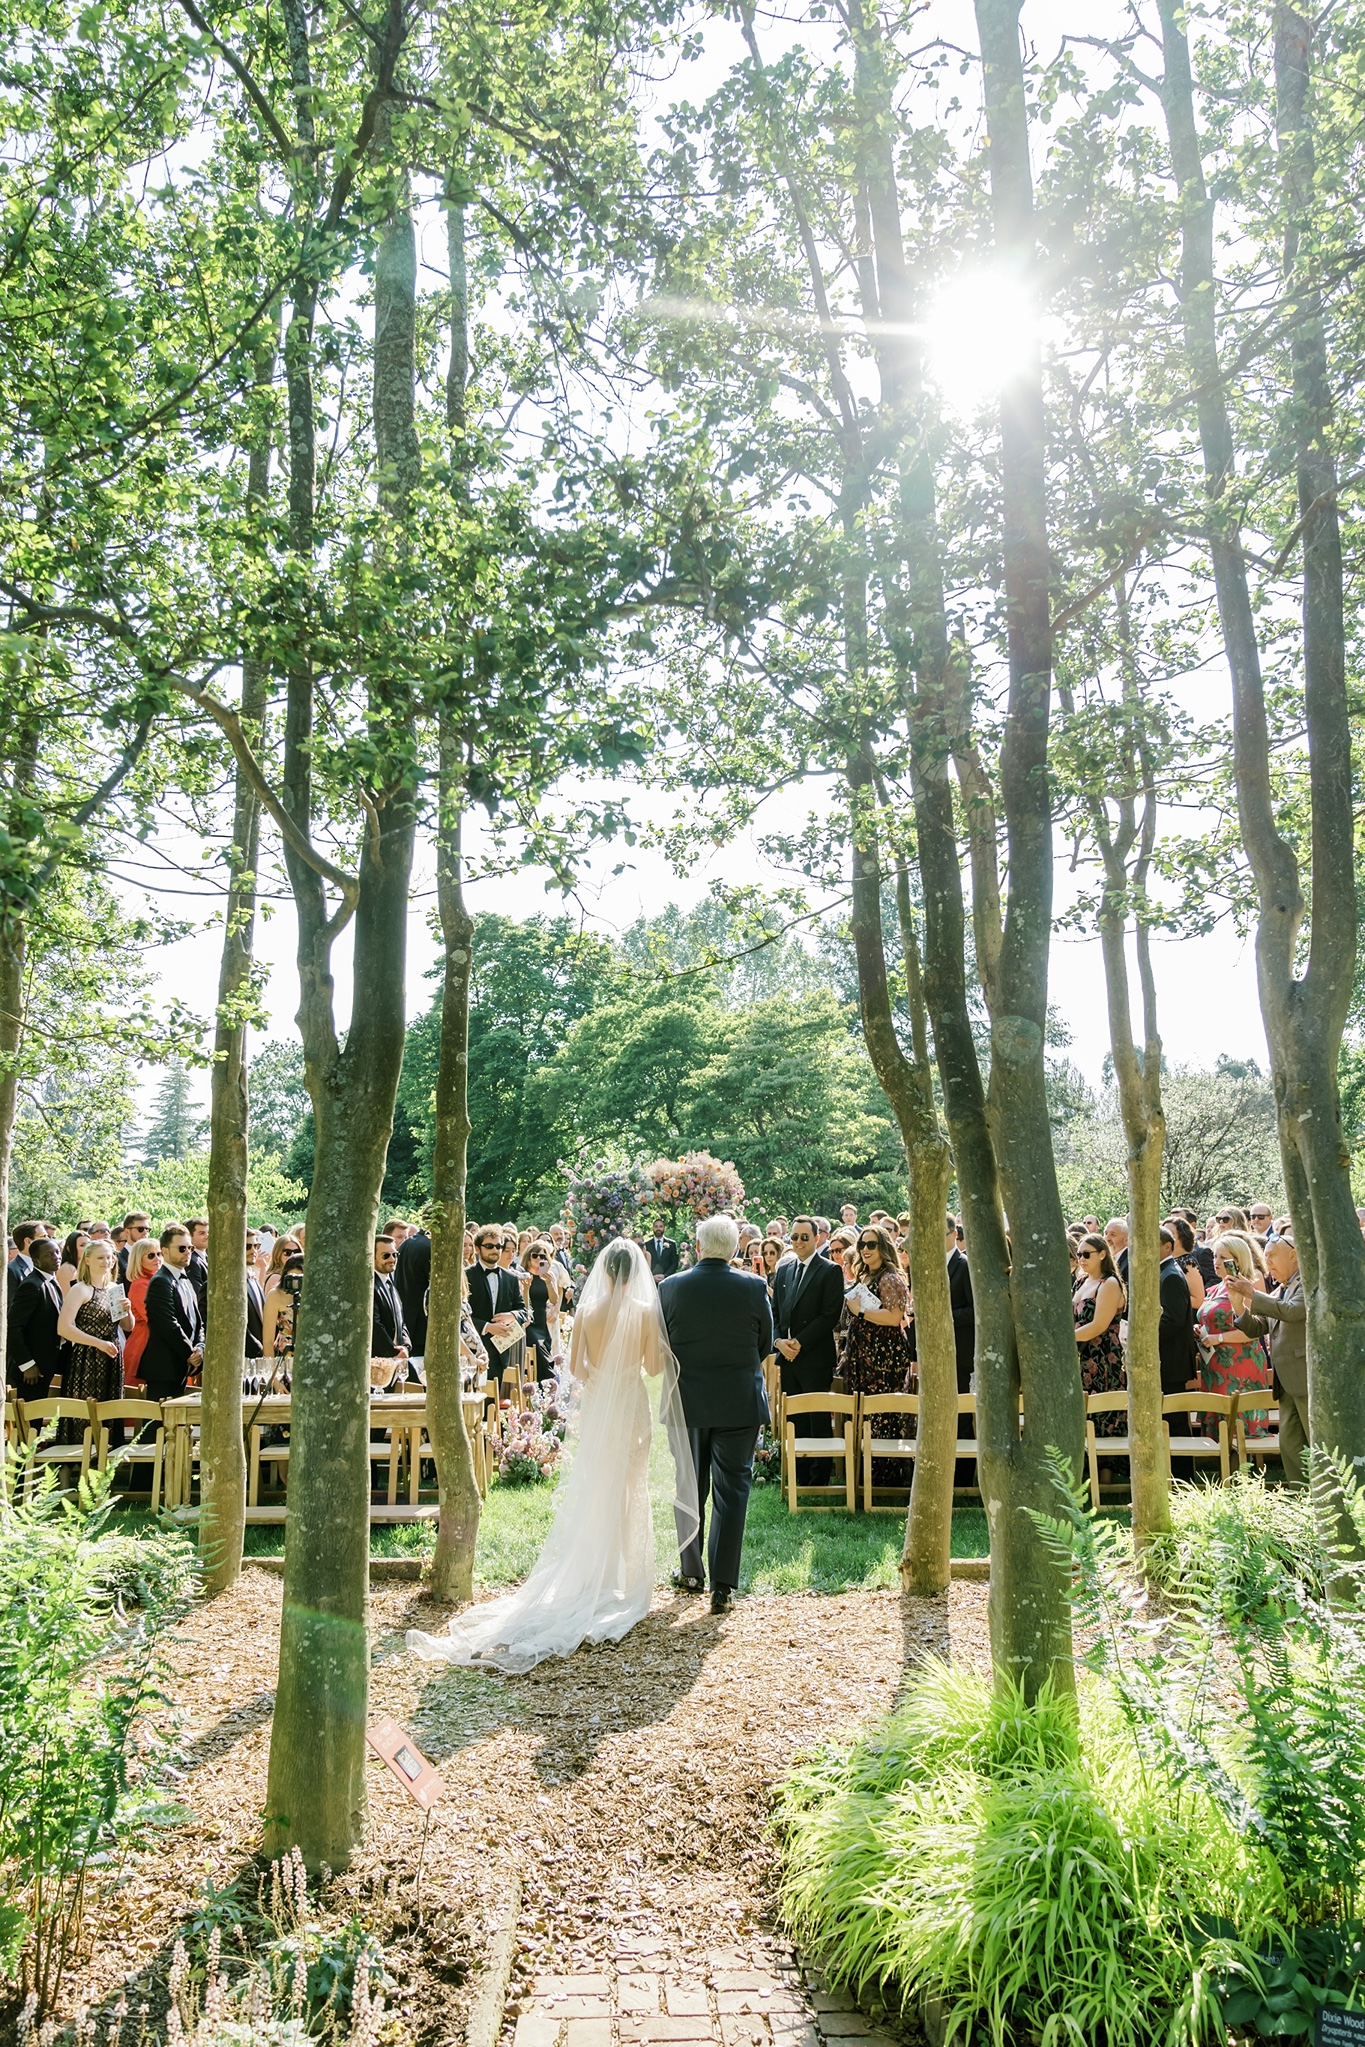 Outdoor ceremony at Yew Dell Gardens wedding